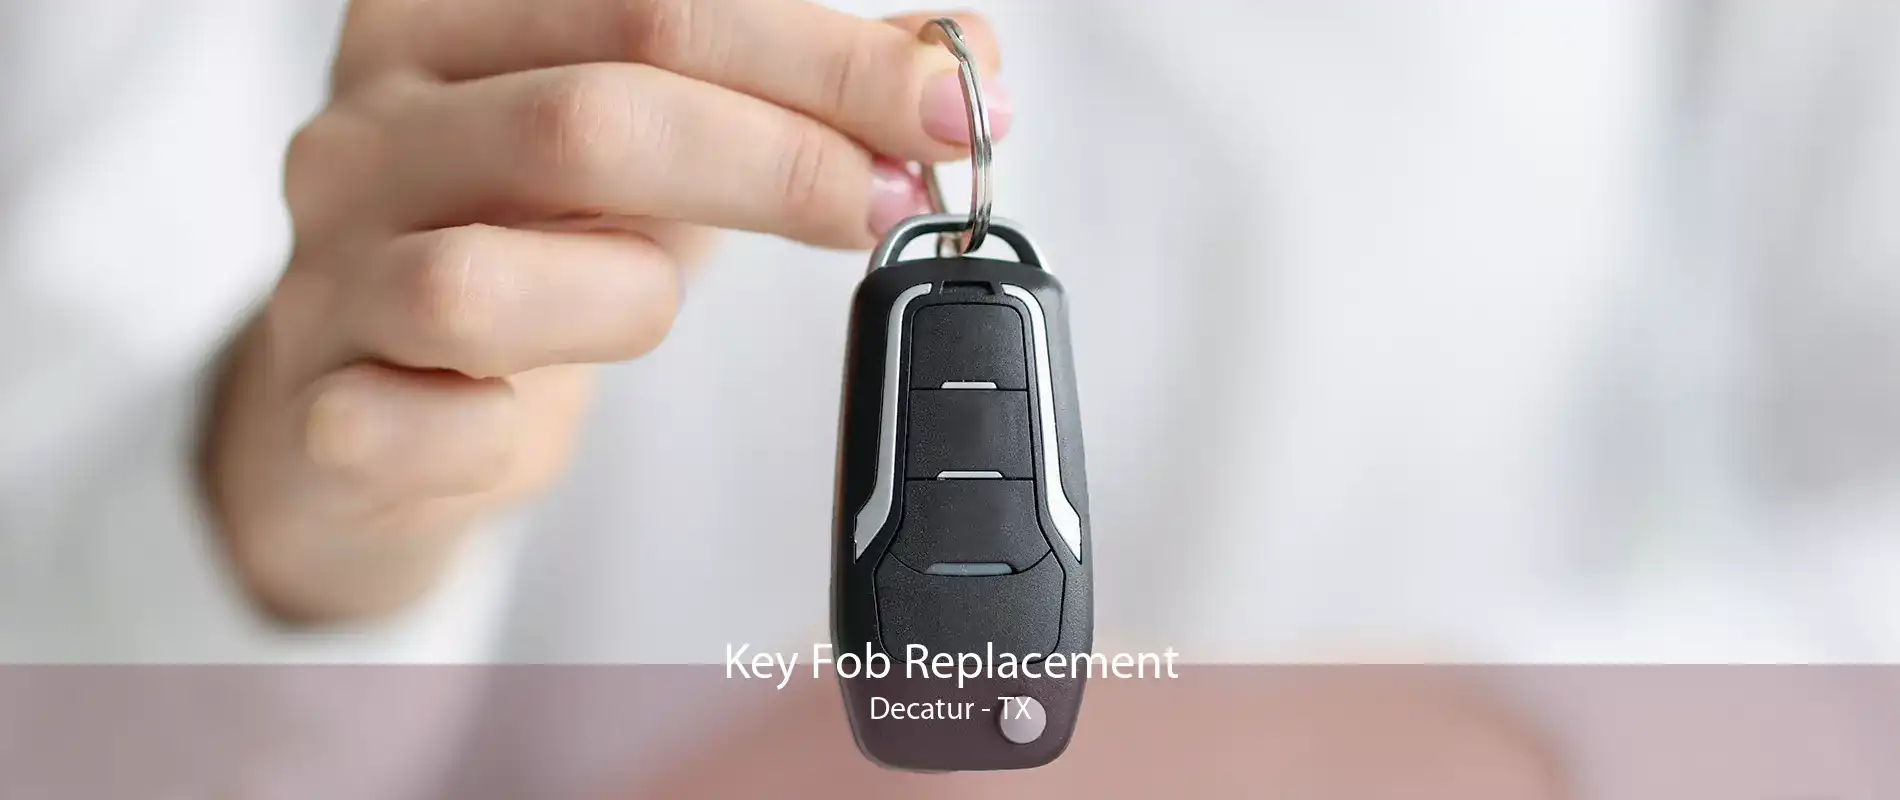 Key Fob Replacement Decatur - TX